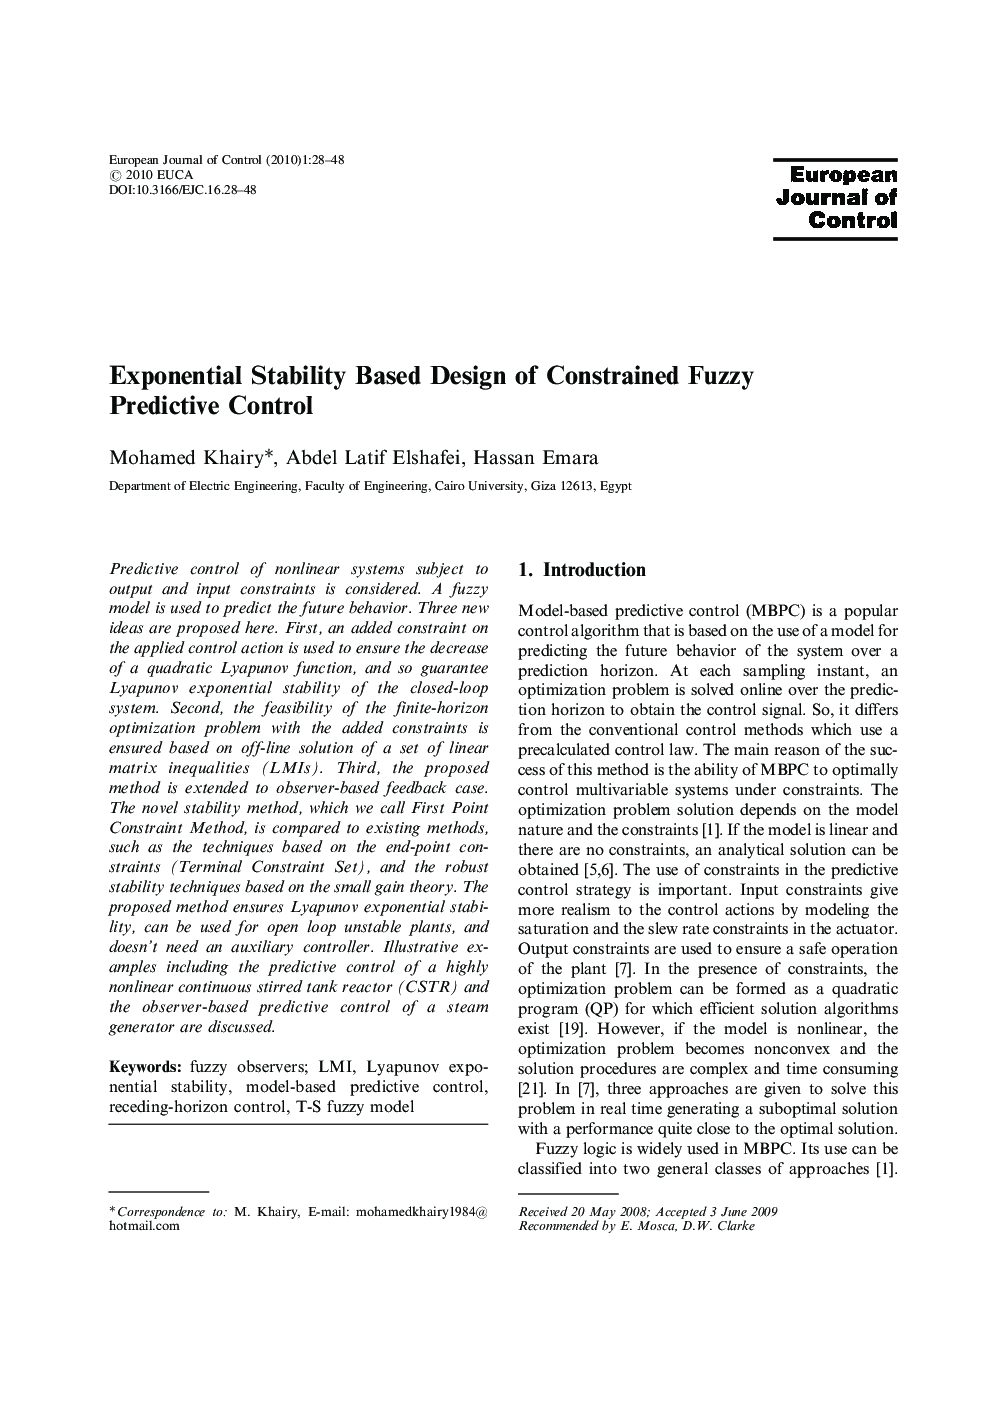 Exponential Stability Based Design of Constrained Fuzzy Predictive Control